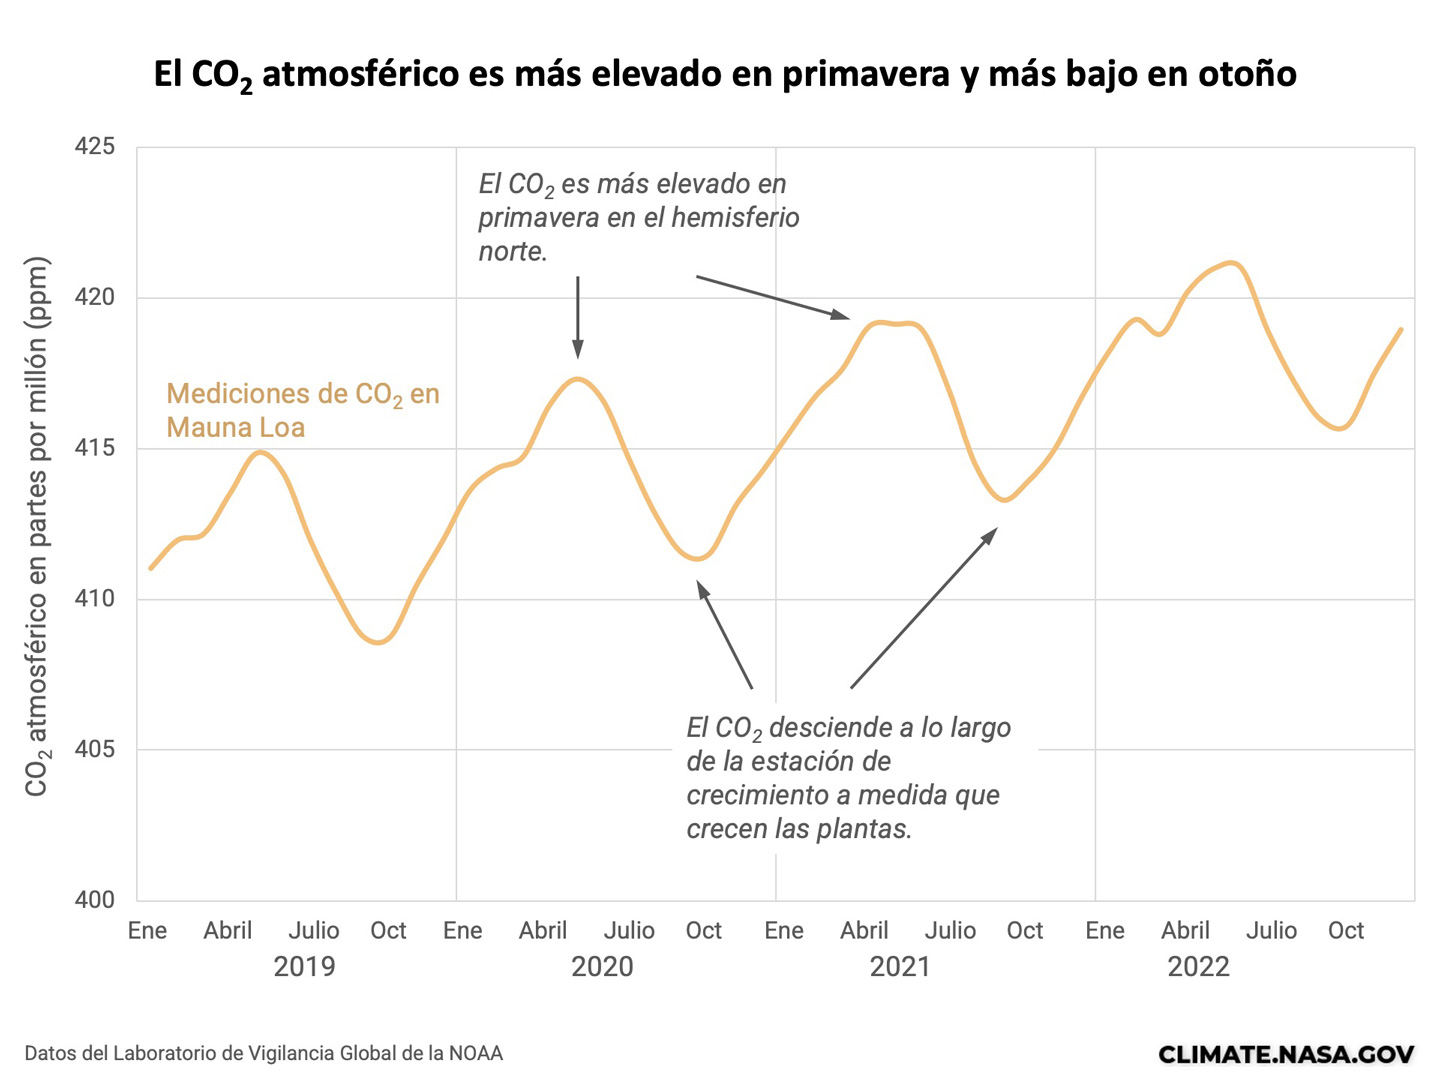 Spanish chart of atmosphere CO2 with seasonal variations